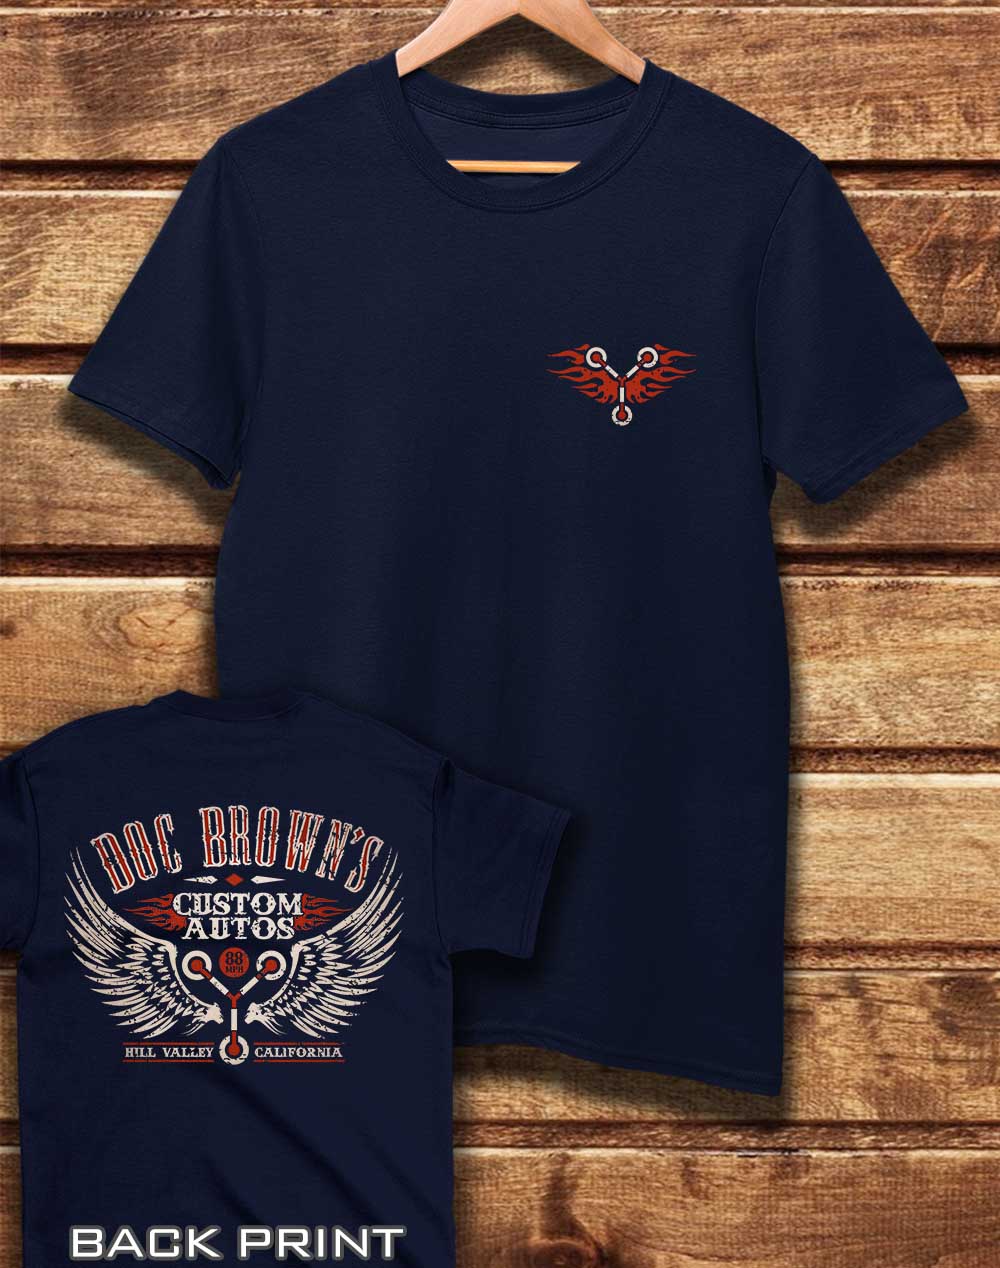 Navy - DELUXE Doc Brown's Autos with Back Print Organic Cotton T-Shirt